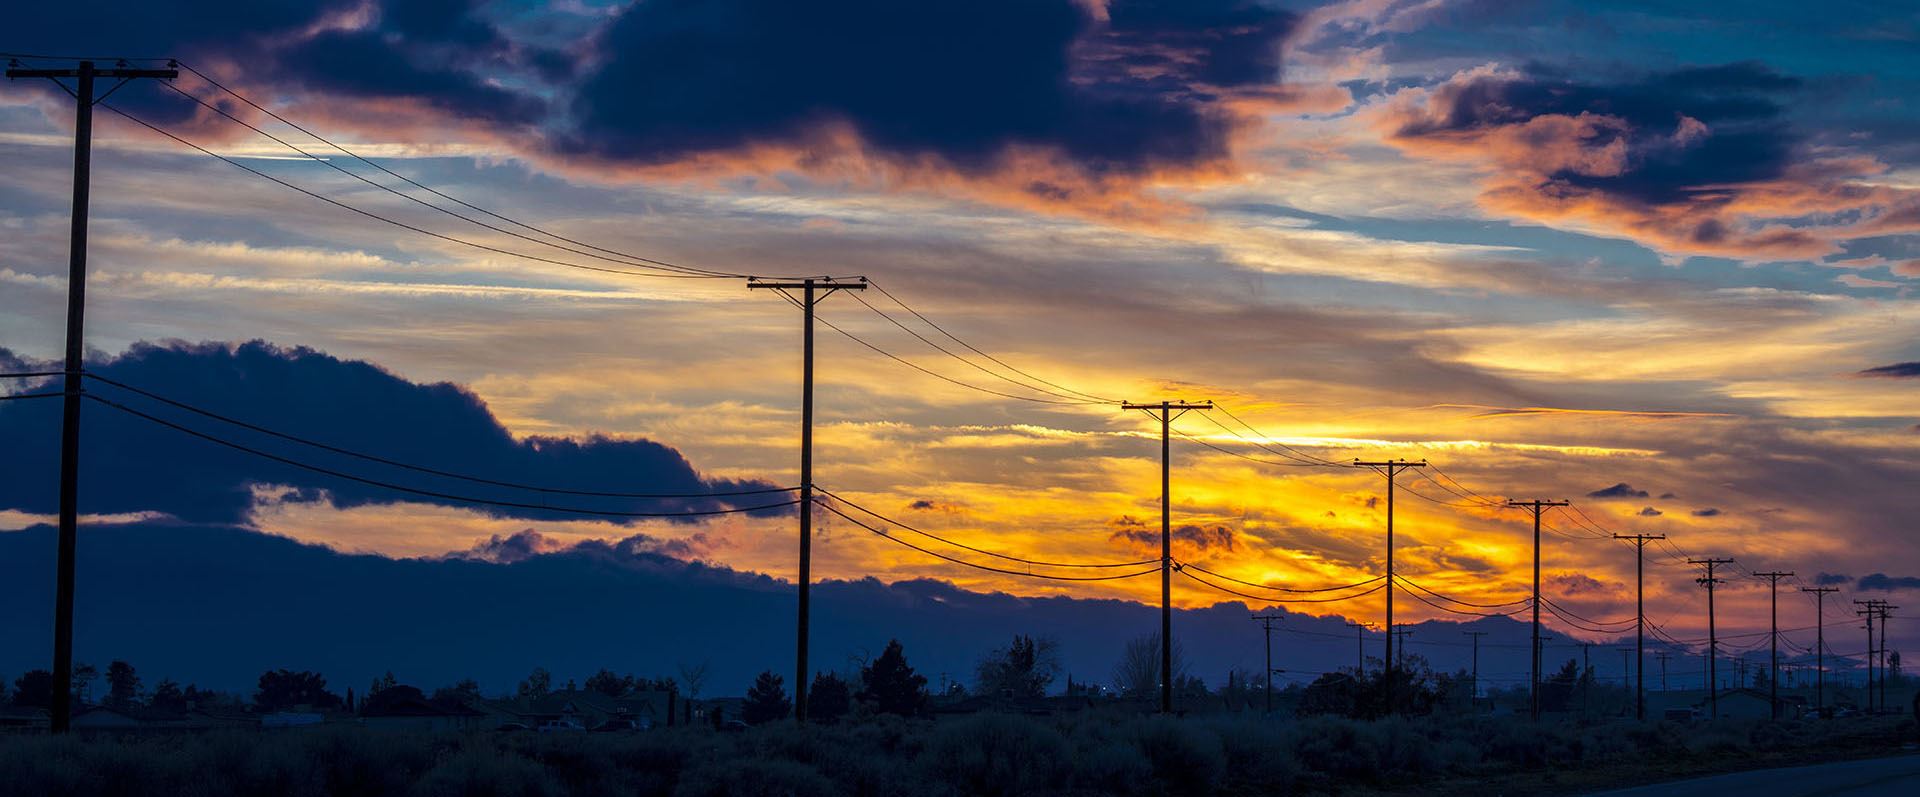 Telephone poles during sunset